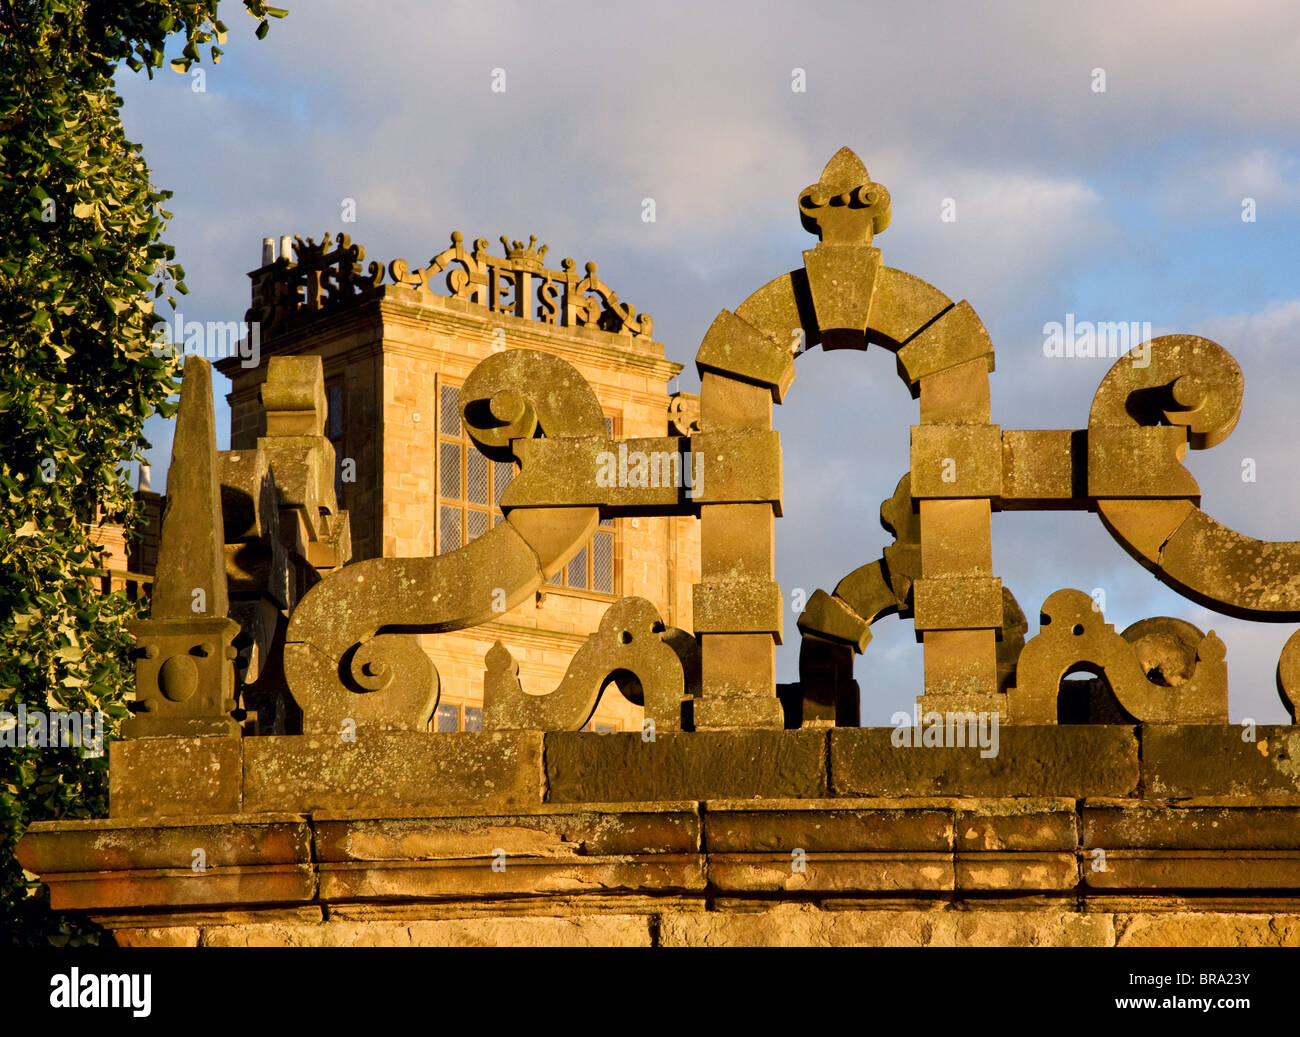 Evening sunlight casts a golden glow on the facade of Hardwick Hall in Derbyshire seen through stone strapwork of garden wall Stock Photo